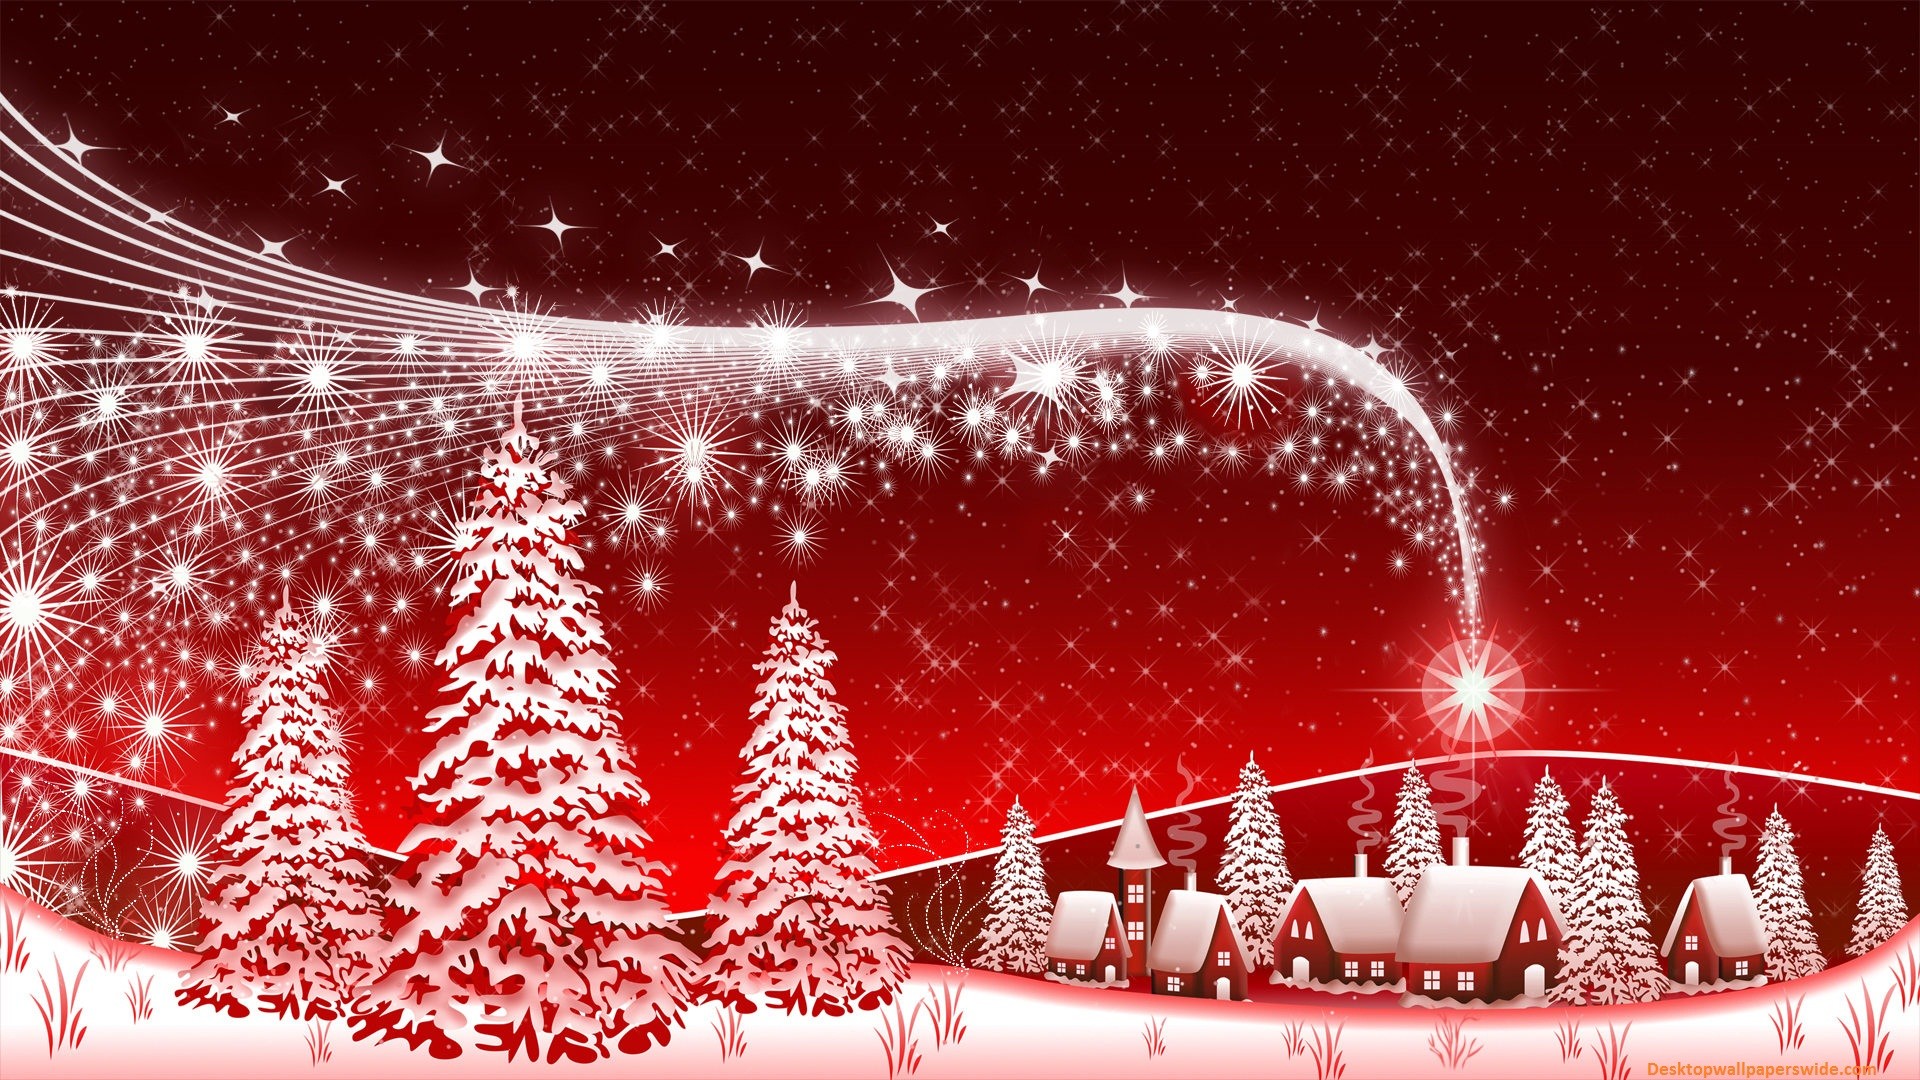 1920x1080 Moving Christmas Backgrounds